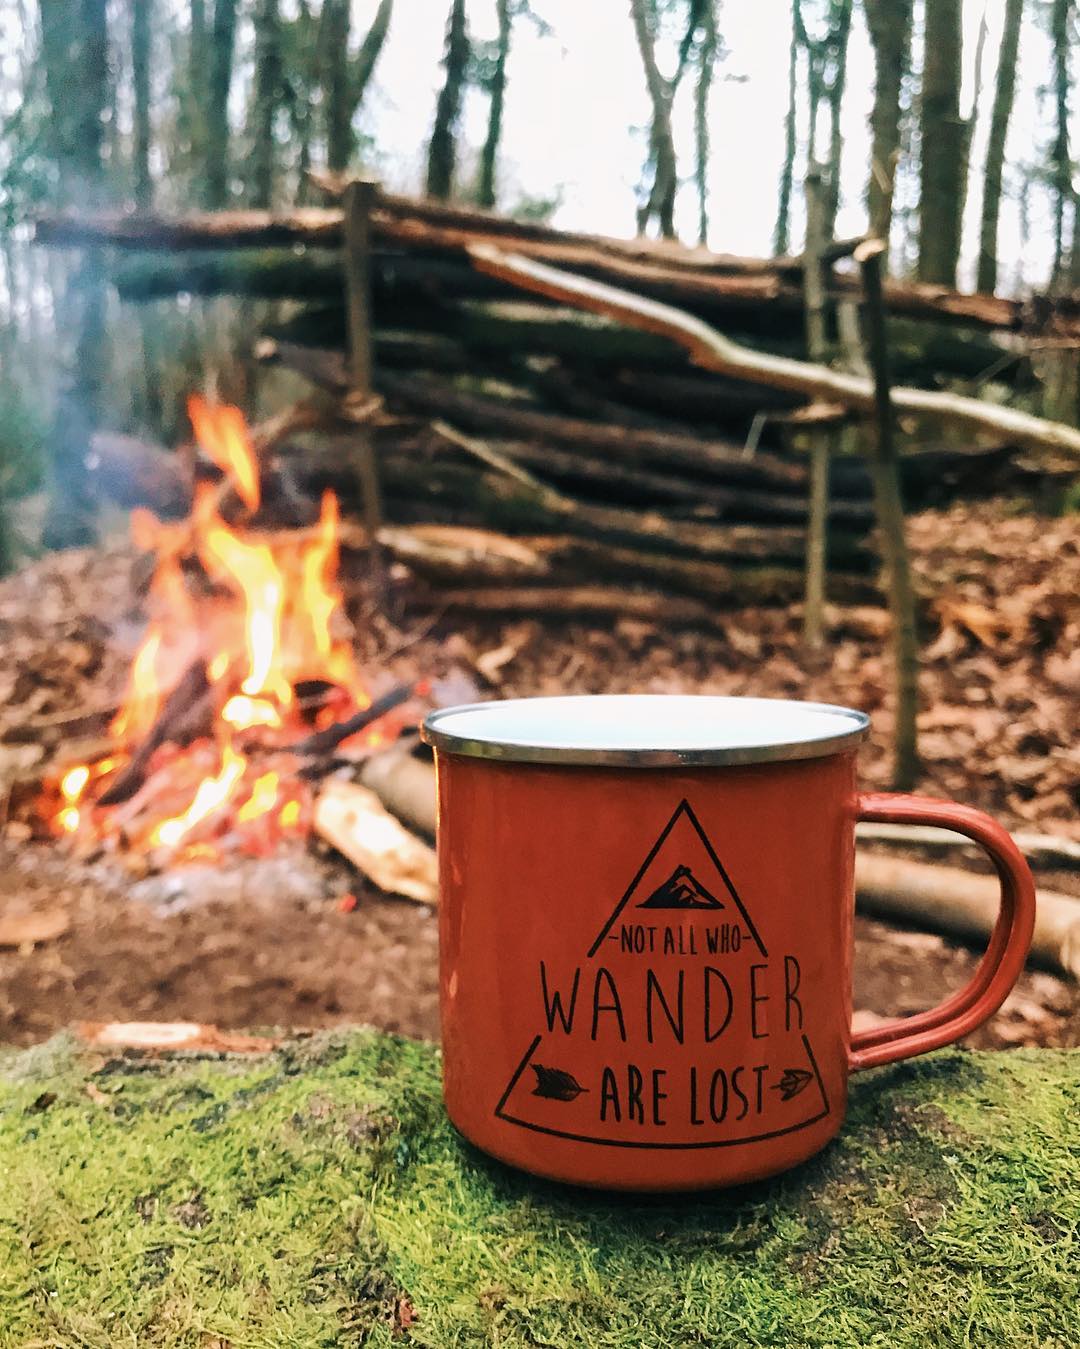 A mug sat on a log in front of a fire in the woods that reads: Not all who wander are lost.